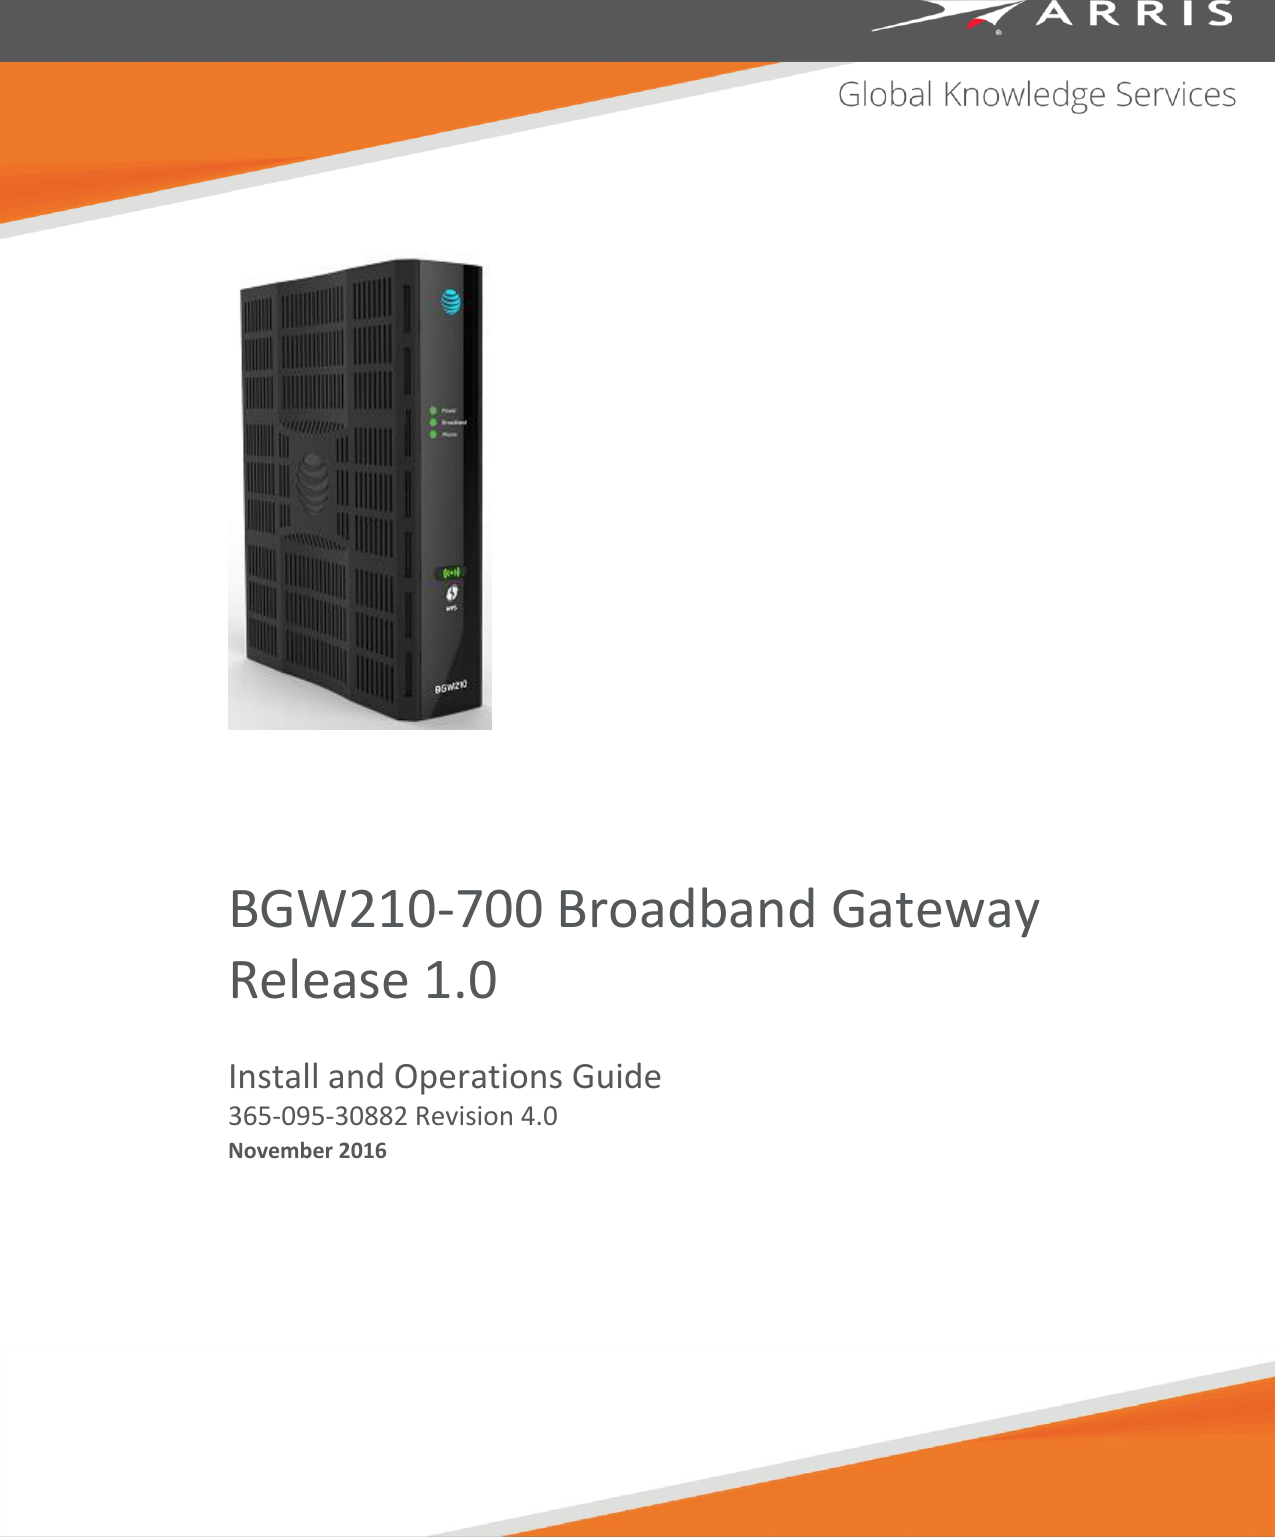            BGW210-700 Broadband Gateway Release 1.0 Install and Operations Guide 365-095-30882 Revision 4.0  November 2016   